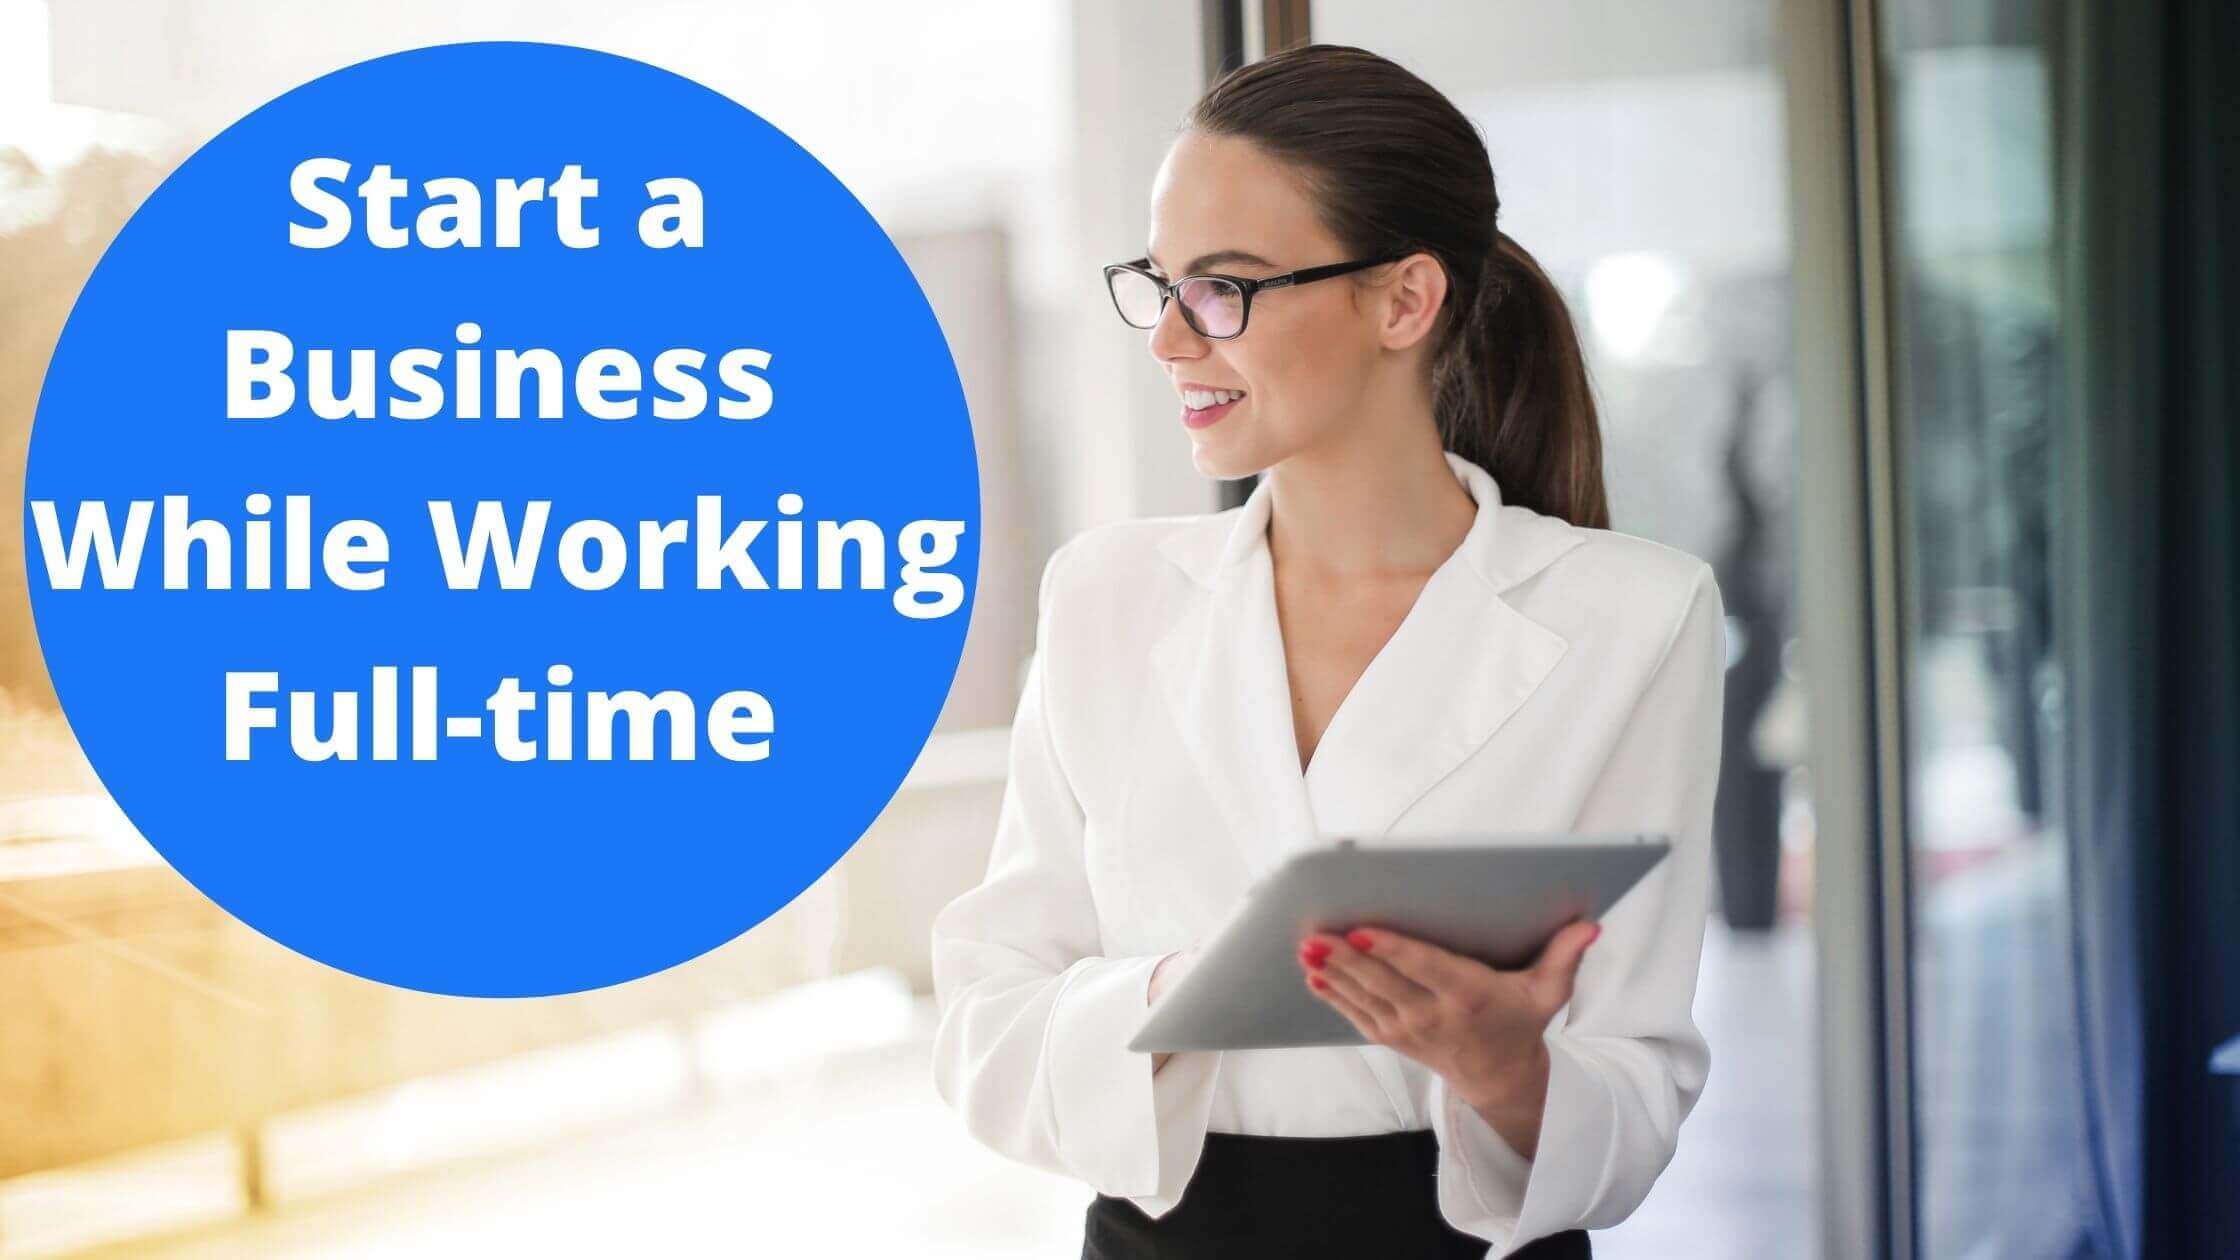 Start a Business While Working Full-time